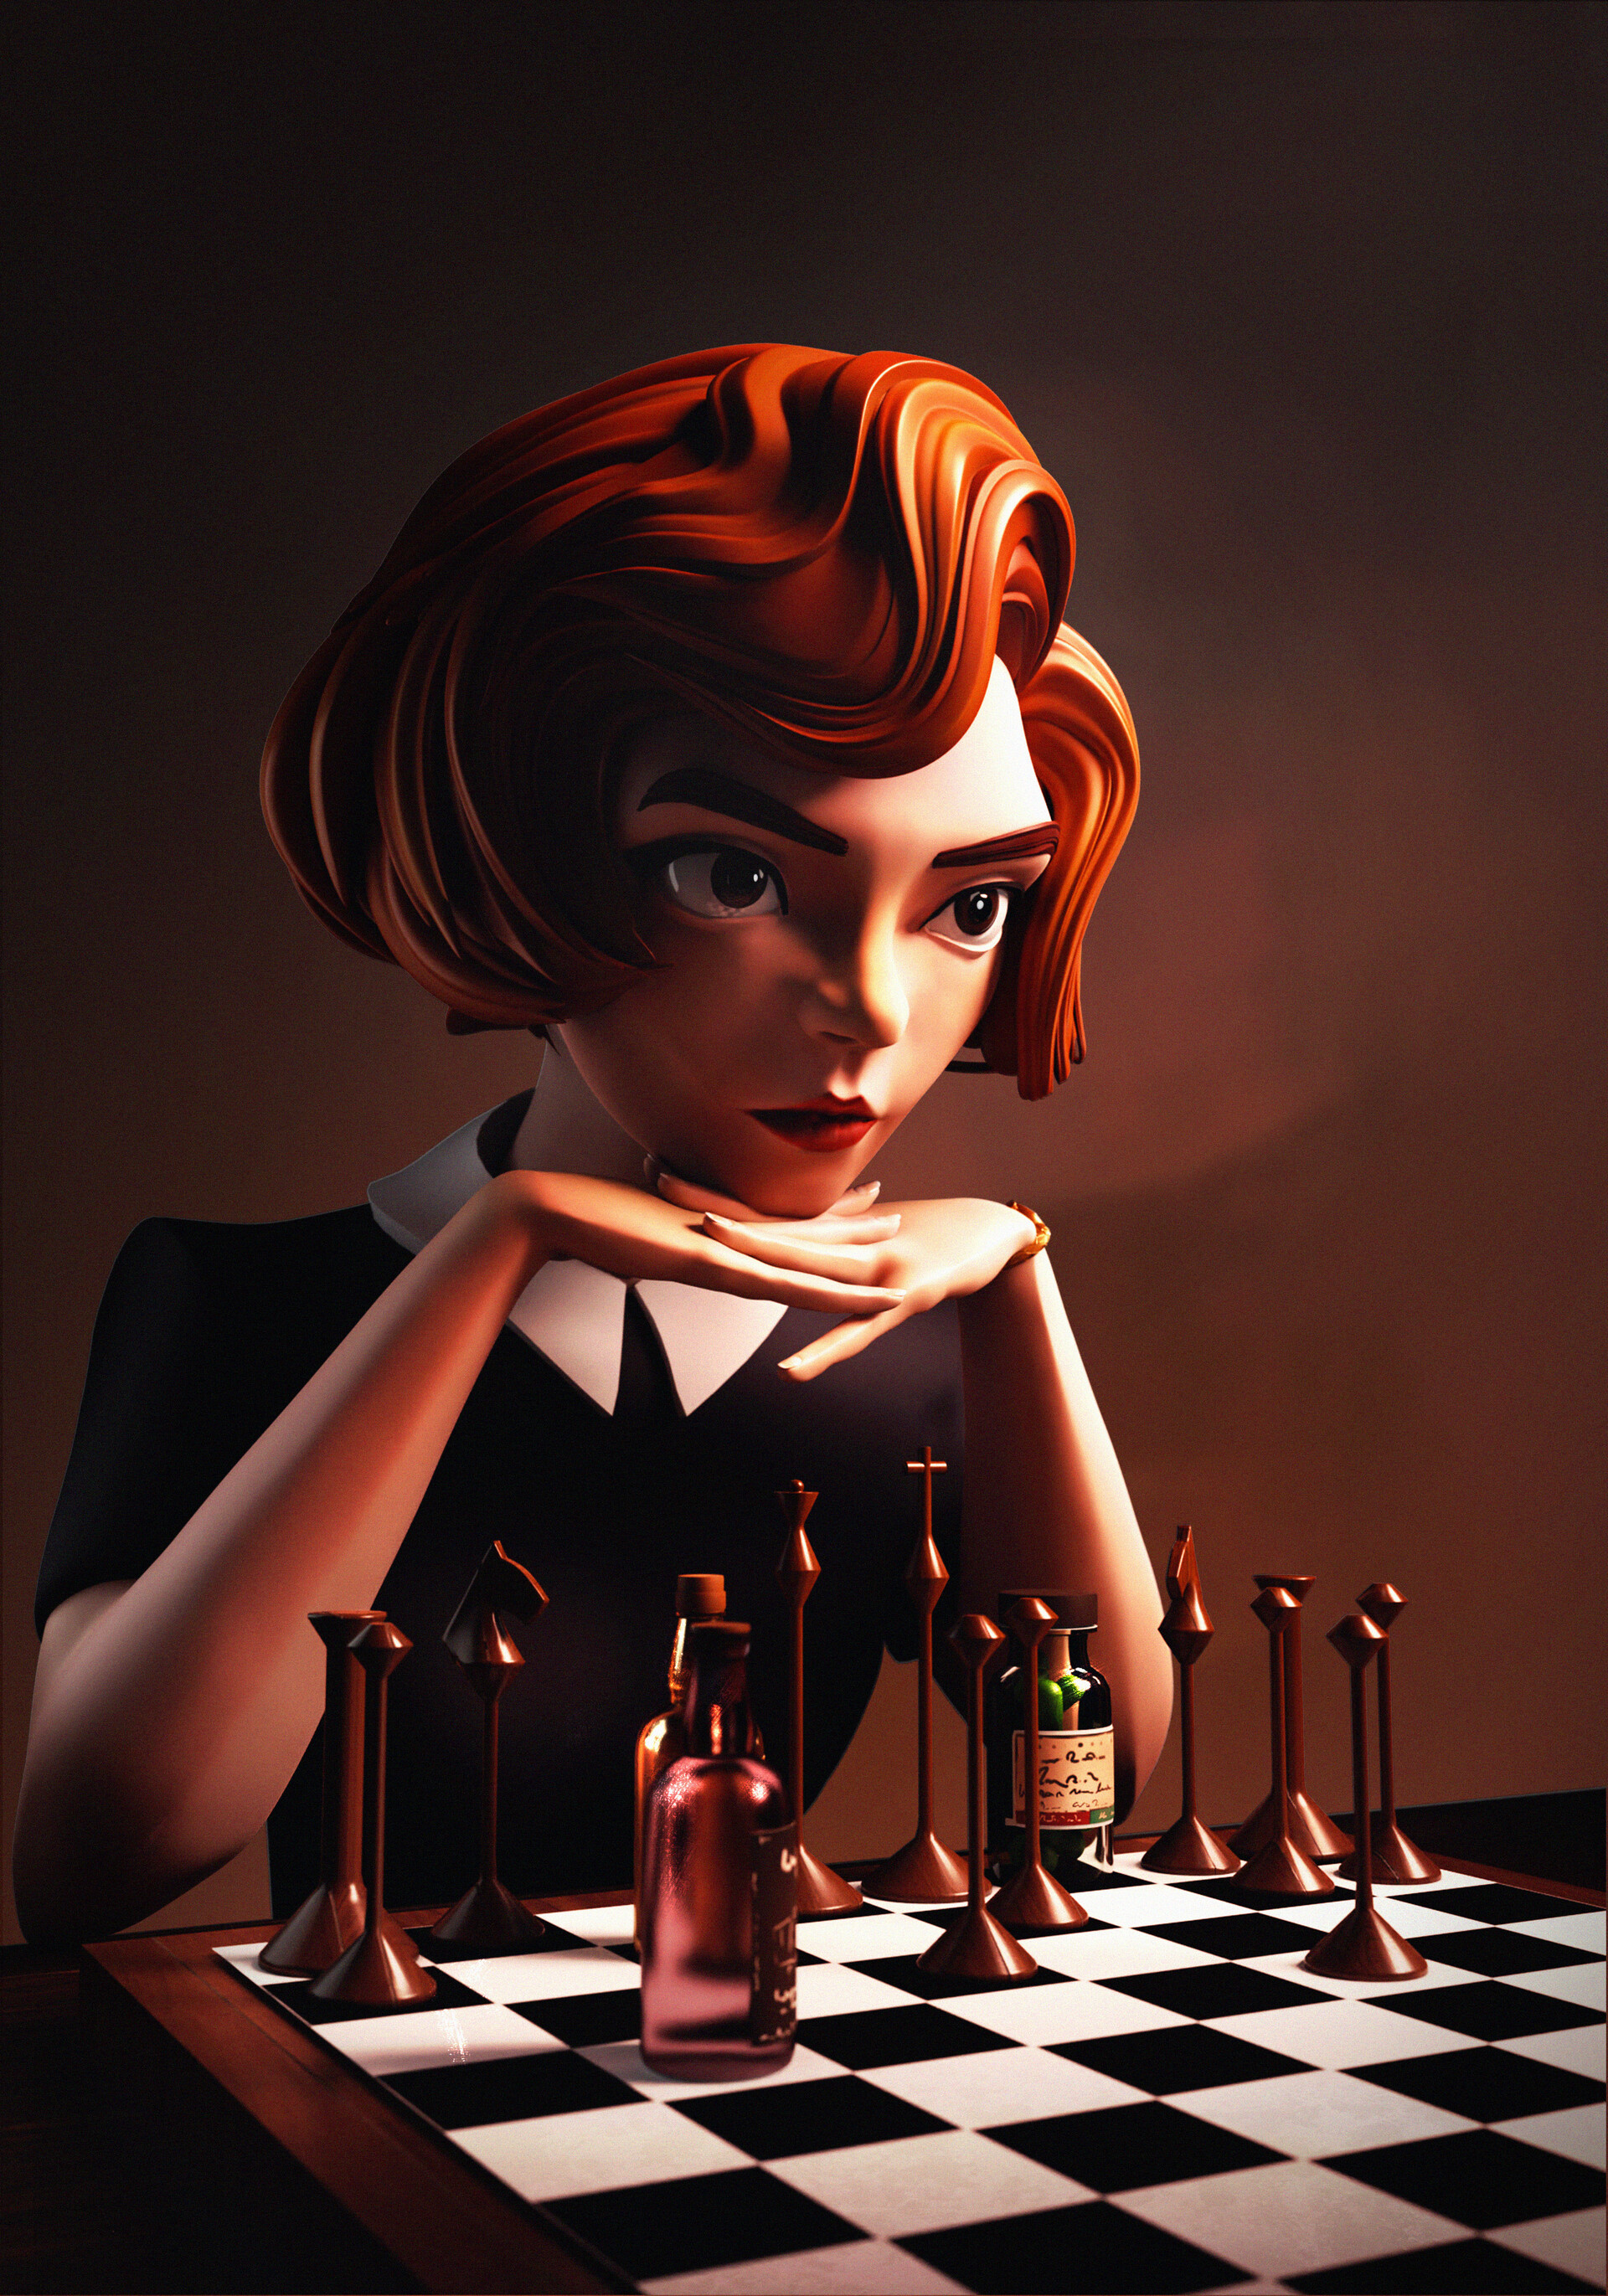 Maxon ZBrush on X: The Queen's Gambit - “My fanart of Elizabeth Harmon  from The Queen's Gambit I did during the weekend. I don't often make fanart  of TV shows, but this